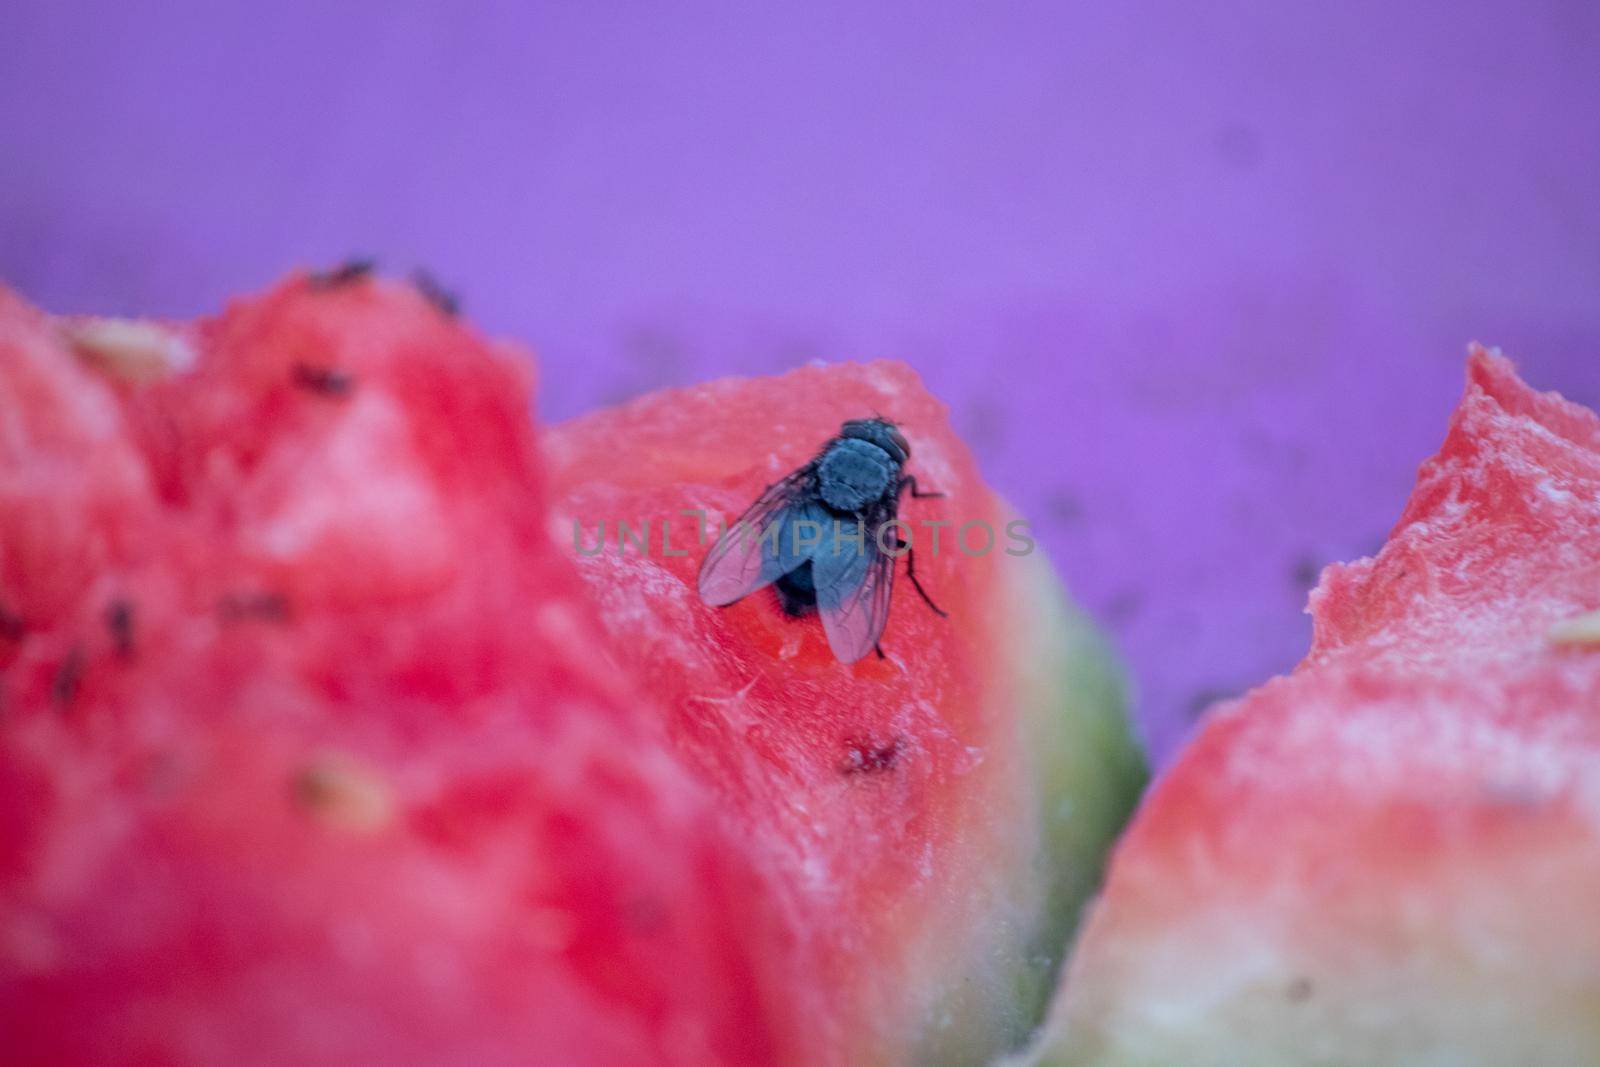 Close up of watermelon with fly and ants on it  by gena_wells